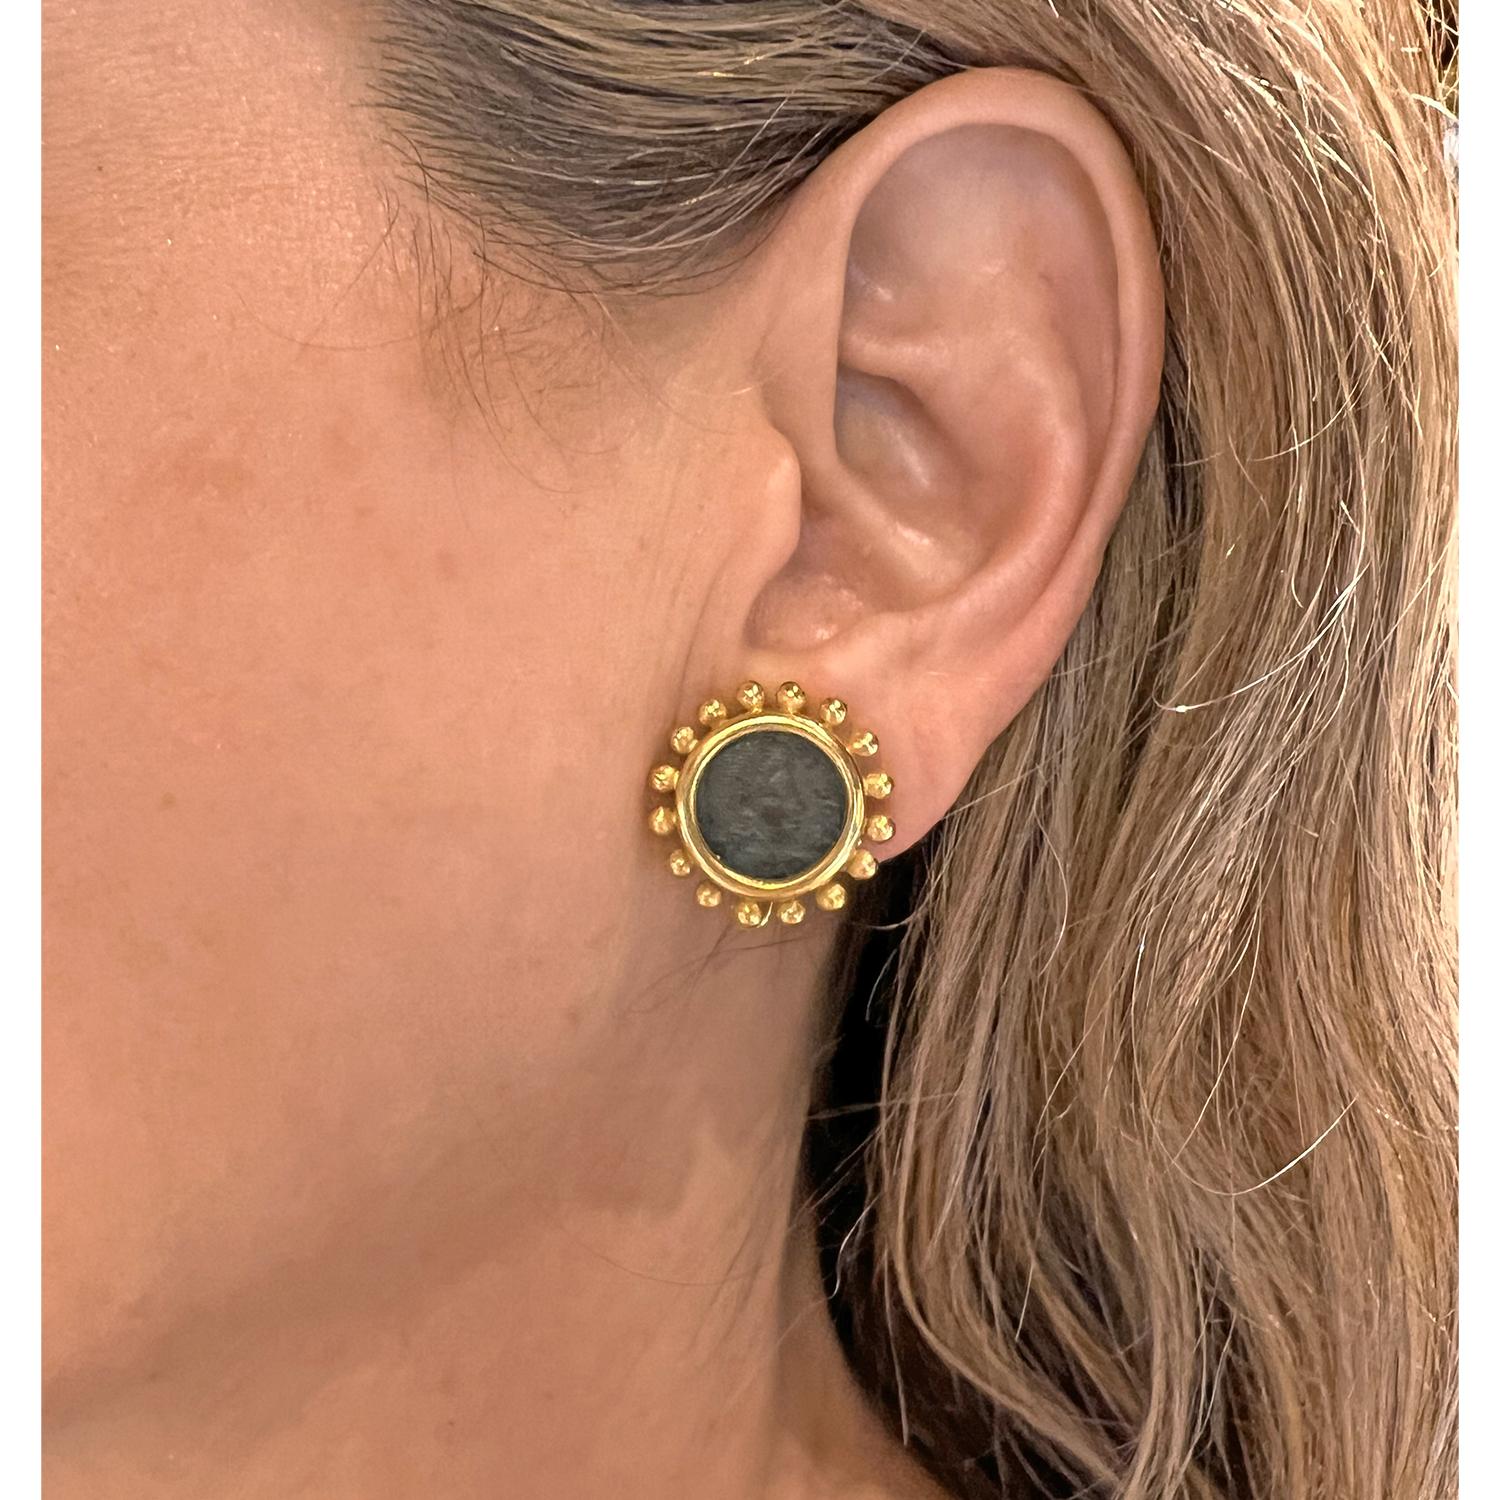 Crafted in 19 karat yellow gold, these Elizabeth Locke earrings center bezel-set ancient bronze coins. The circular design is framed by Locke's signature beaded gold border. Stamped '19k' with Elizabeth Locke design mark. French omega style clip